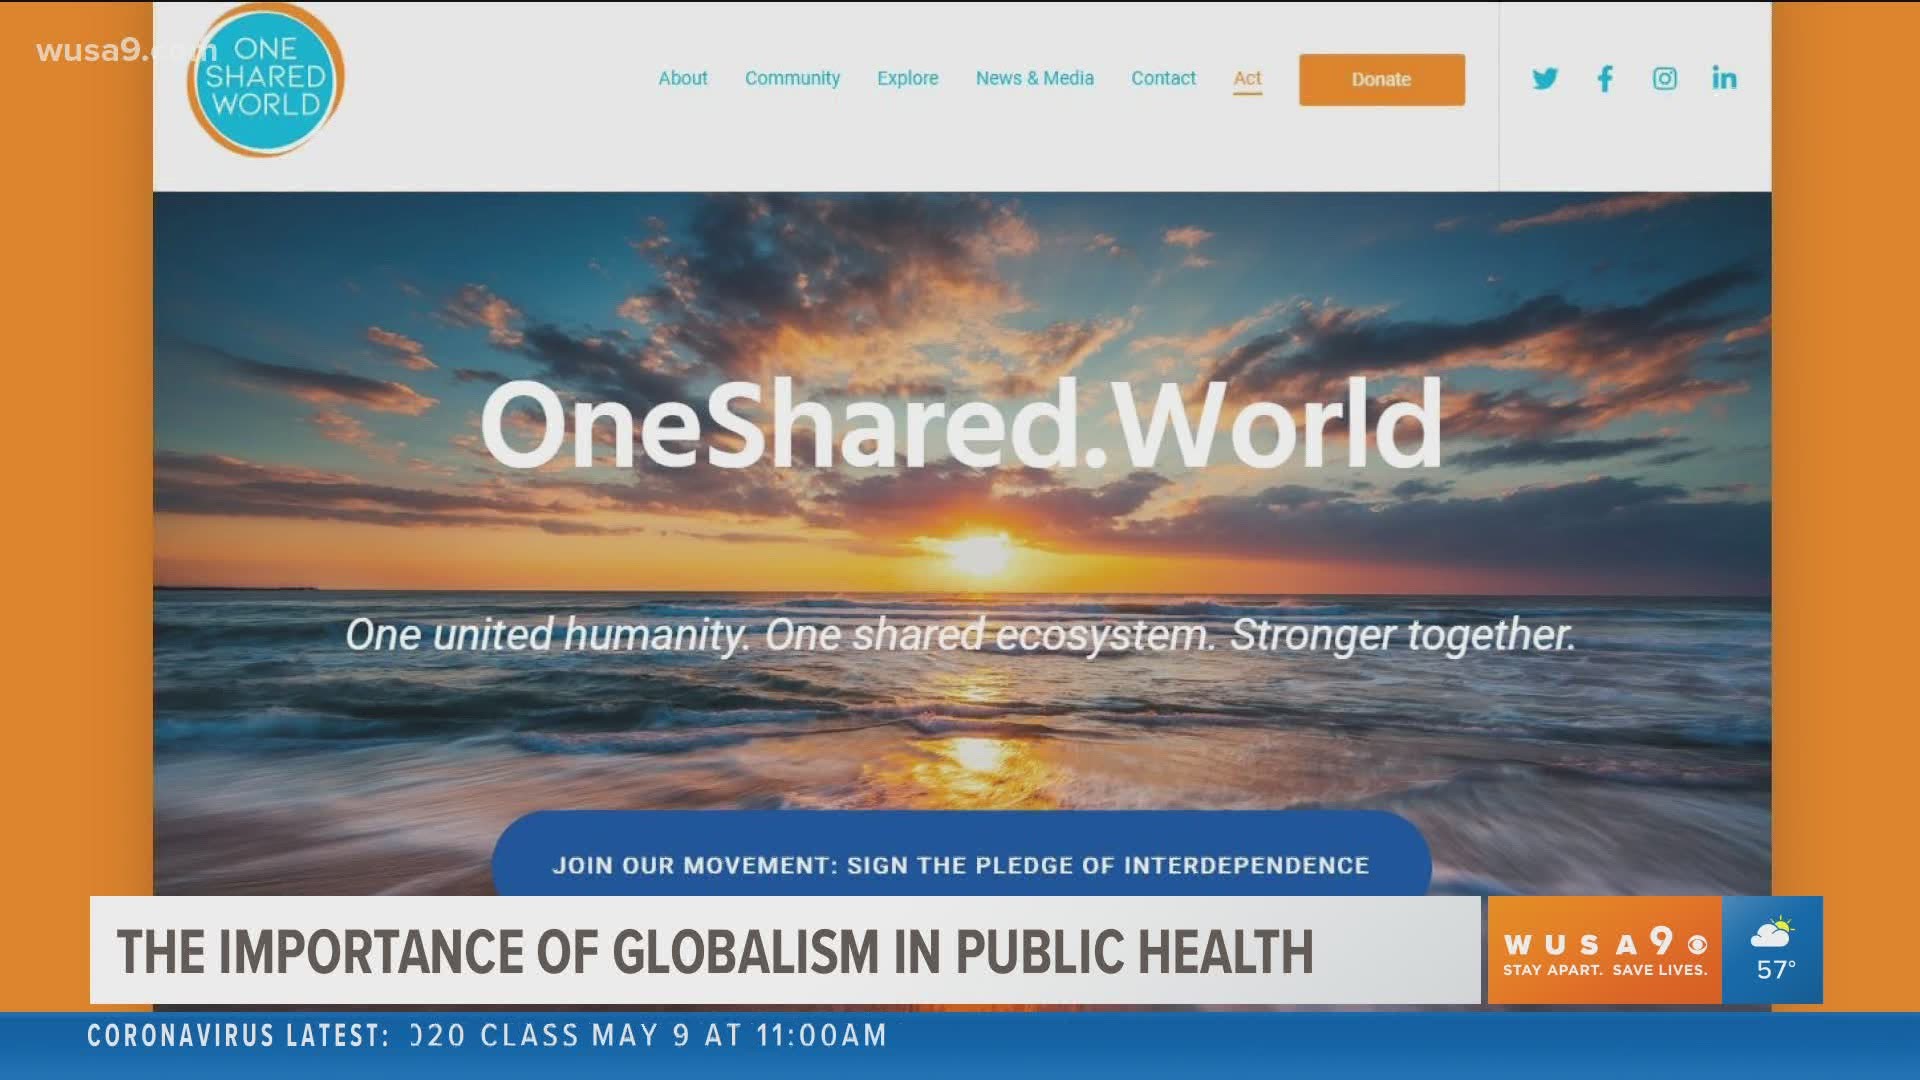 World Health Organization Advisor and author, Jamie Metzl, shares how you can get involved on a global scale to better public health by joining One Shared World.